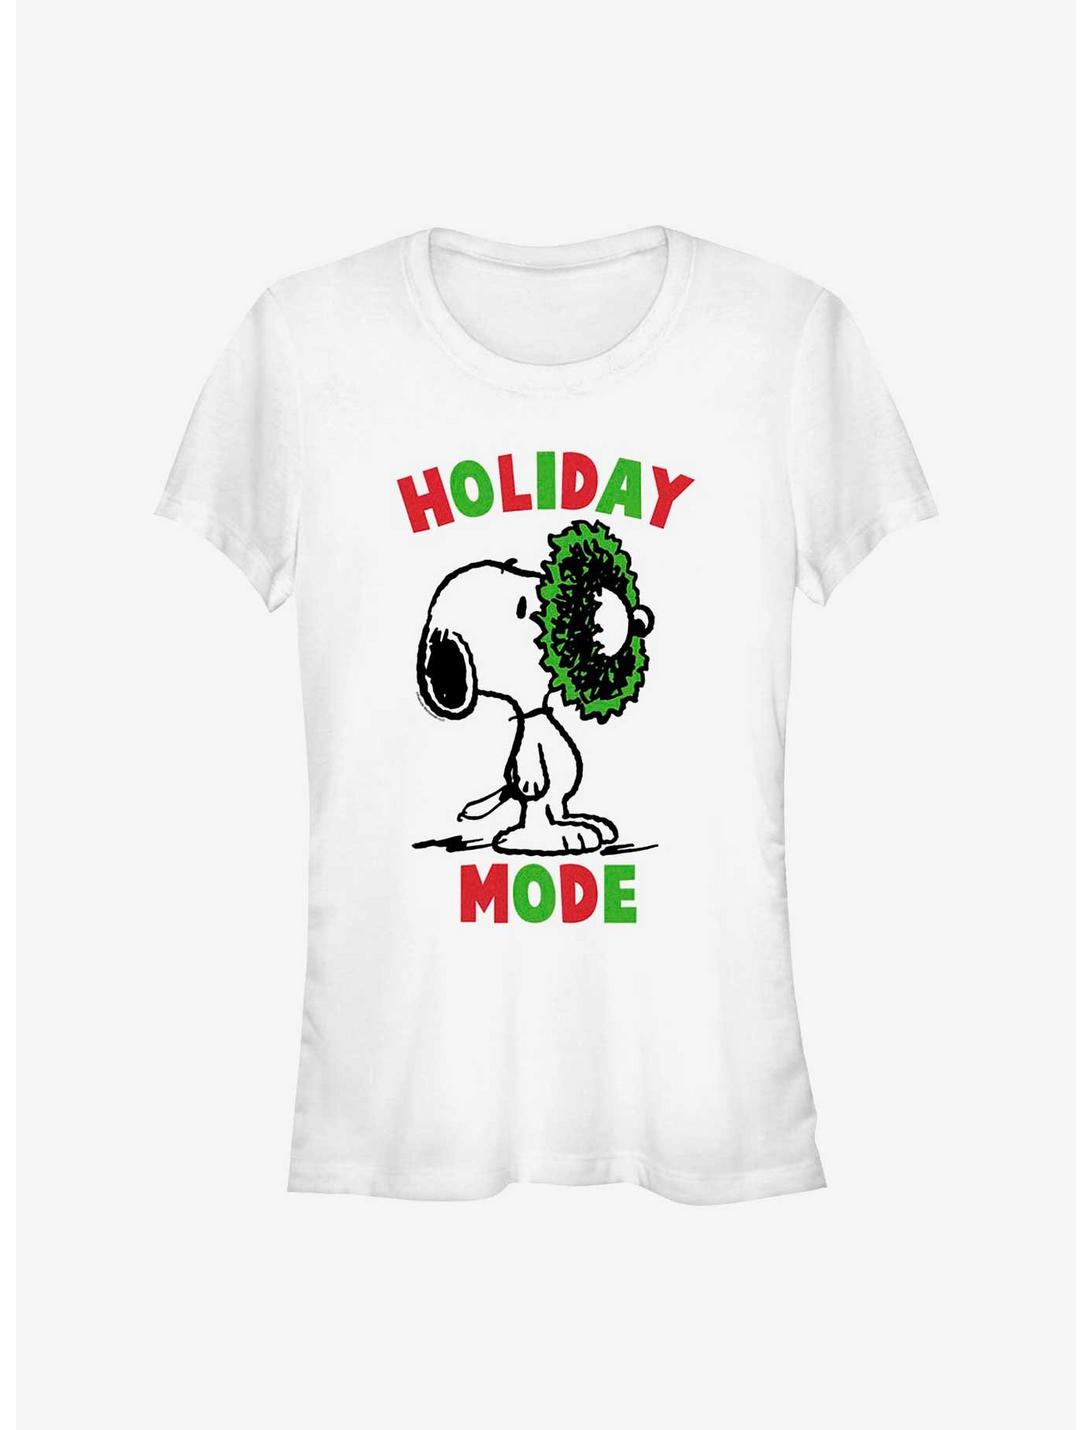 Peanuts Holiday Mode Snoopy Wreath Girls T-Shirt, WHITE, hi-res